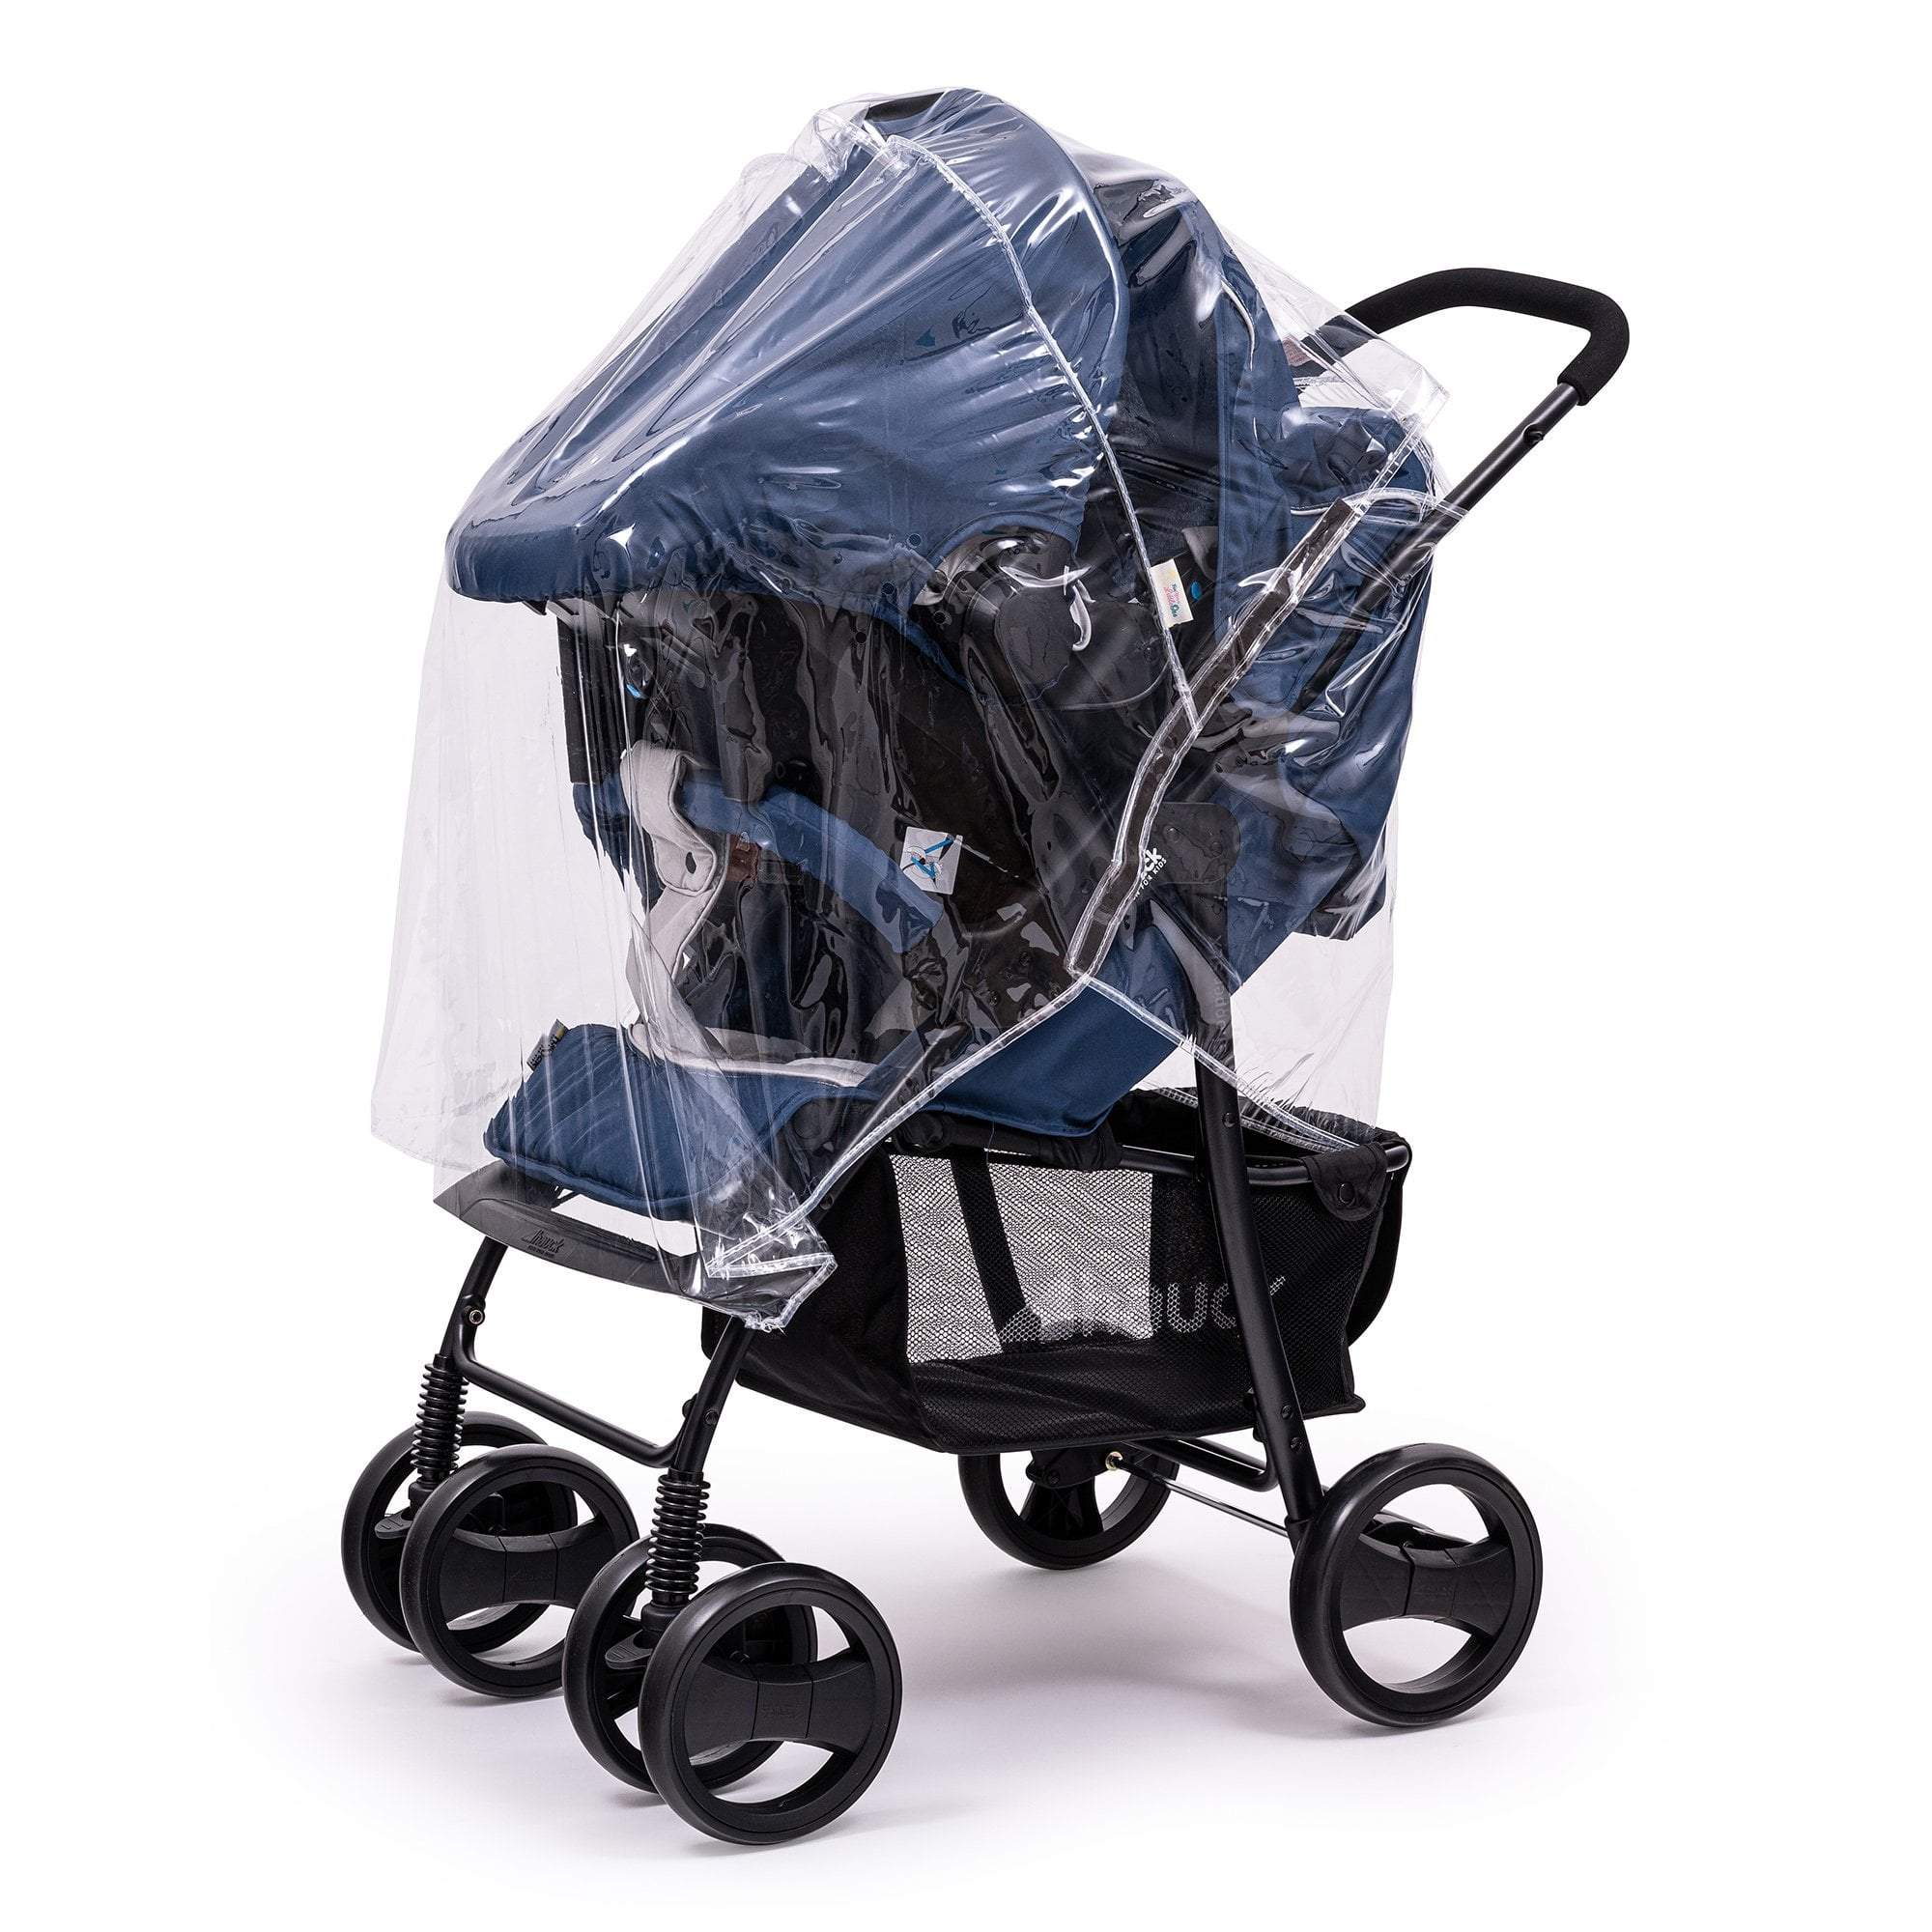 Travel System Raincover Compatible with Red Kite - Fits All Models - For Your Little One